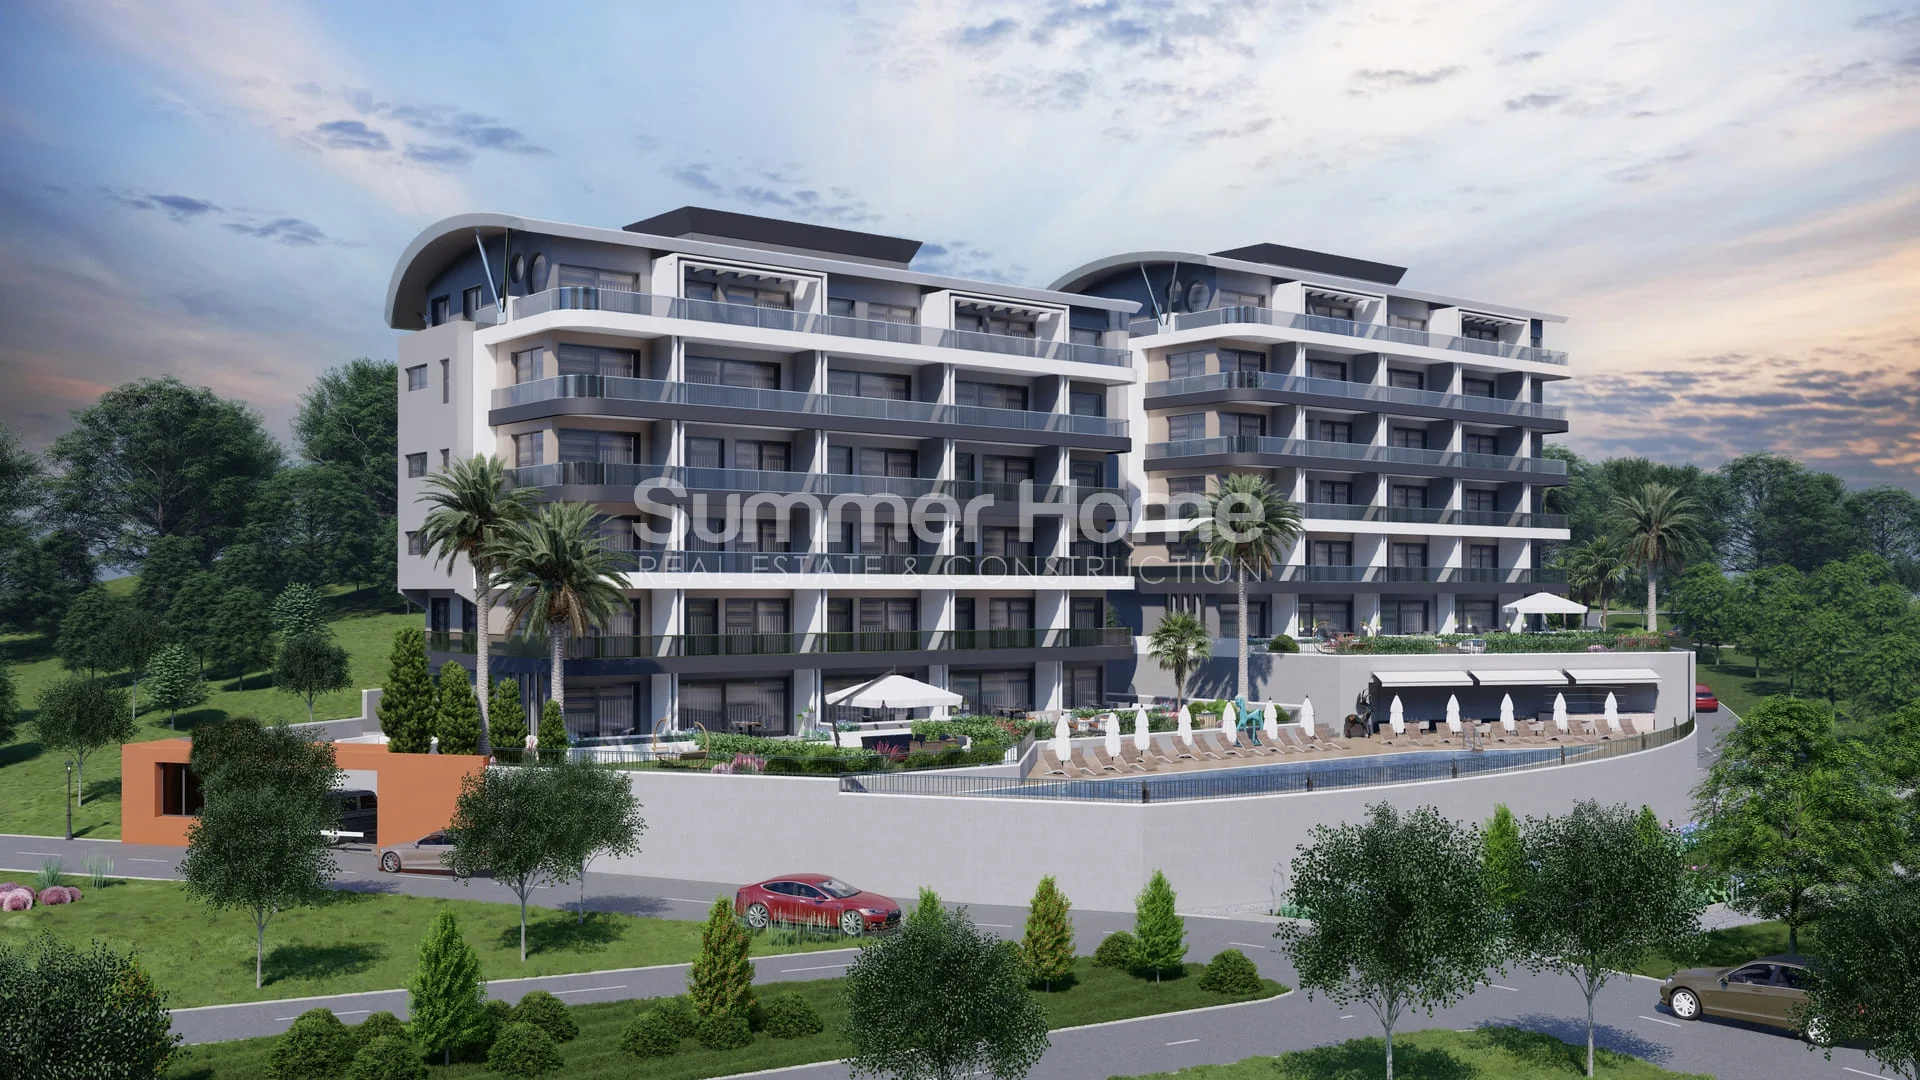 Stunning Sea-View Apartments For Sale in Kargicak General - 1